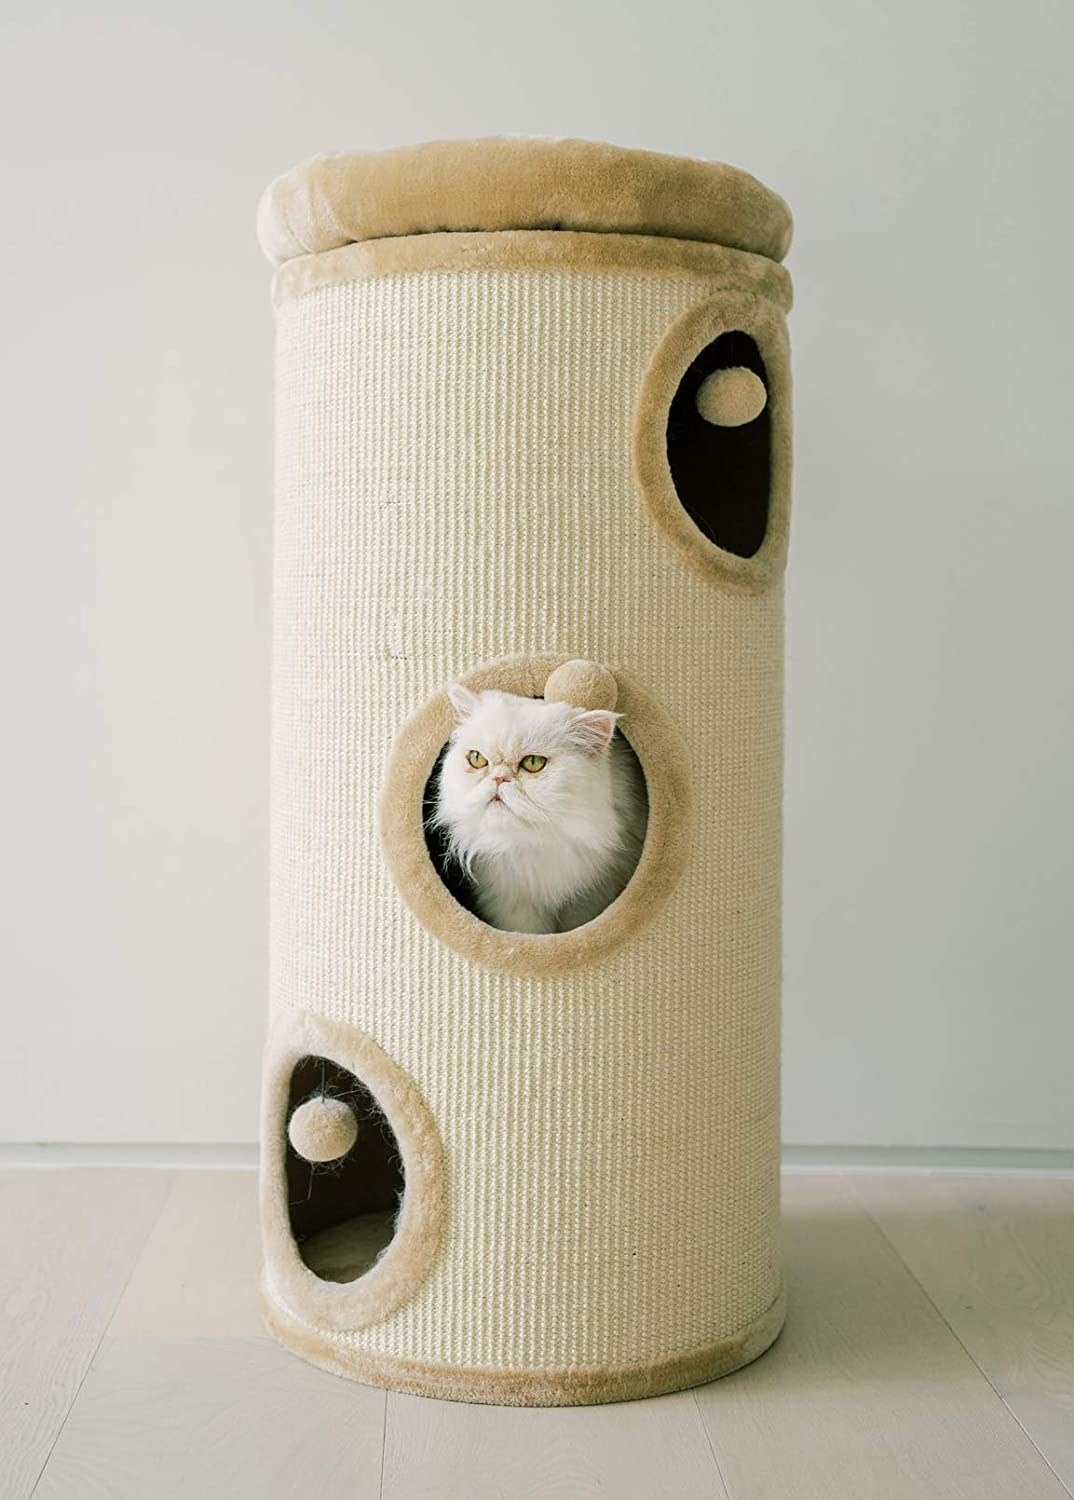 tan cylindrical cat tower with sisal sides, a bed on top, and three circles on each level to allow the cat to jump inside